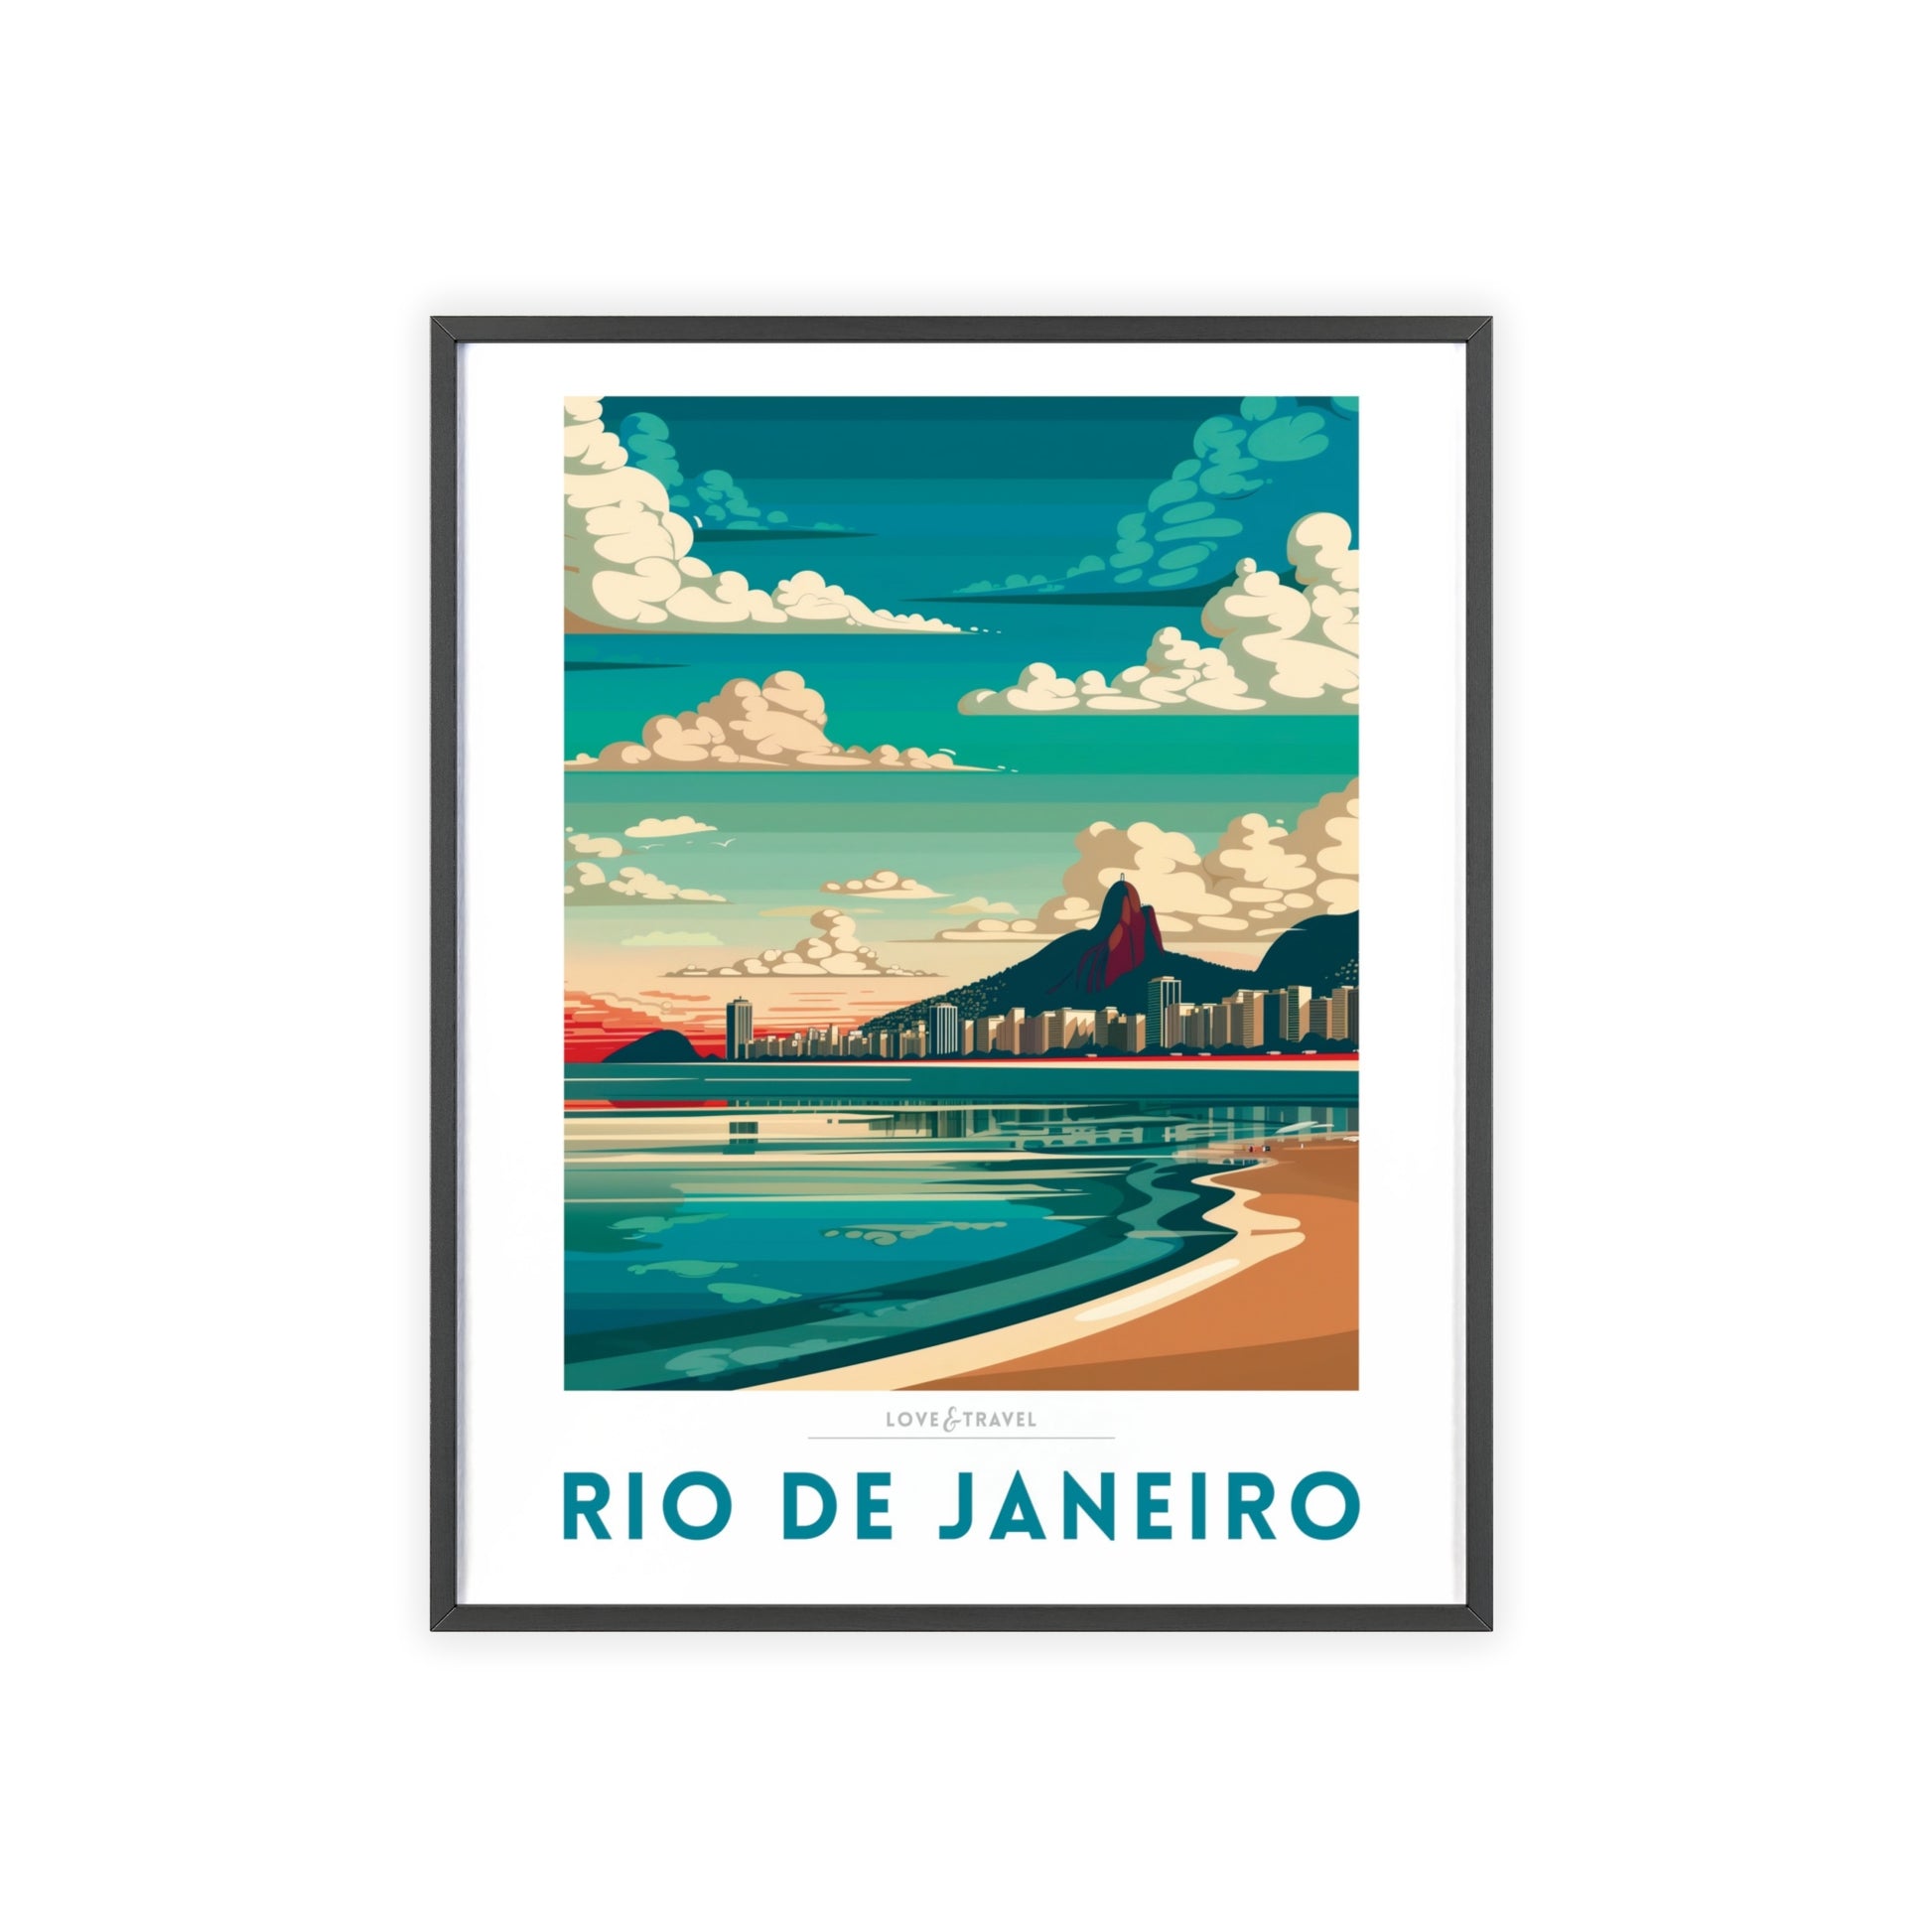 Travel poster of Rio de Janeiro featuring iconic landmarks like Ipanema Beach, capturing the vibrant spirit and beauty of the city.